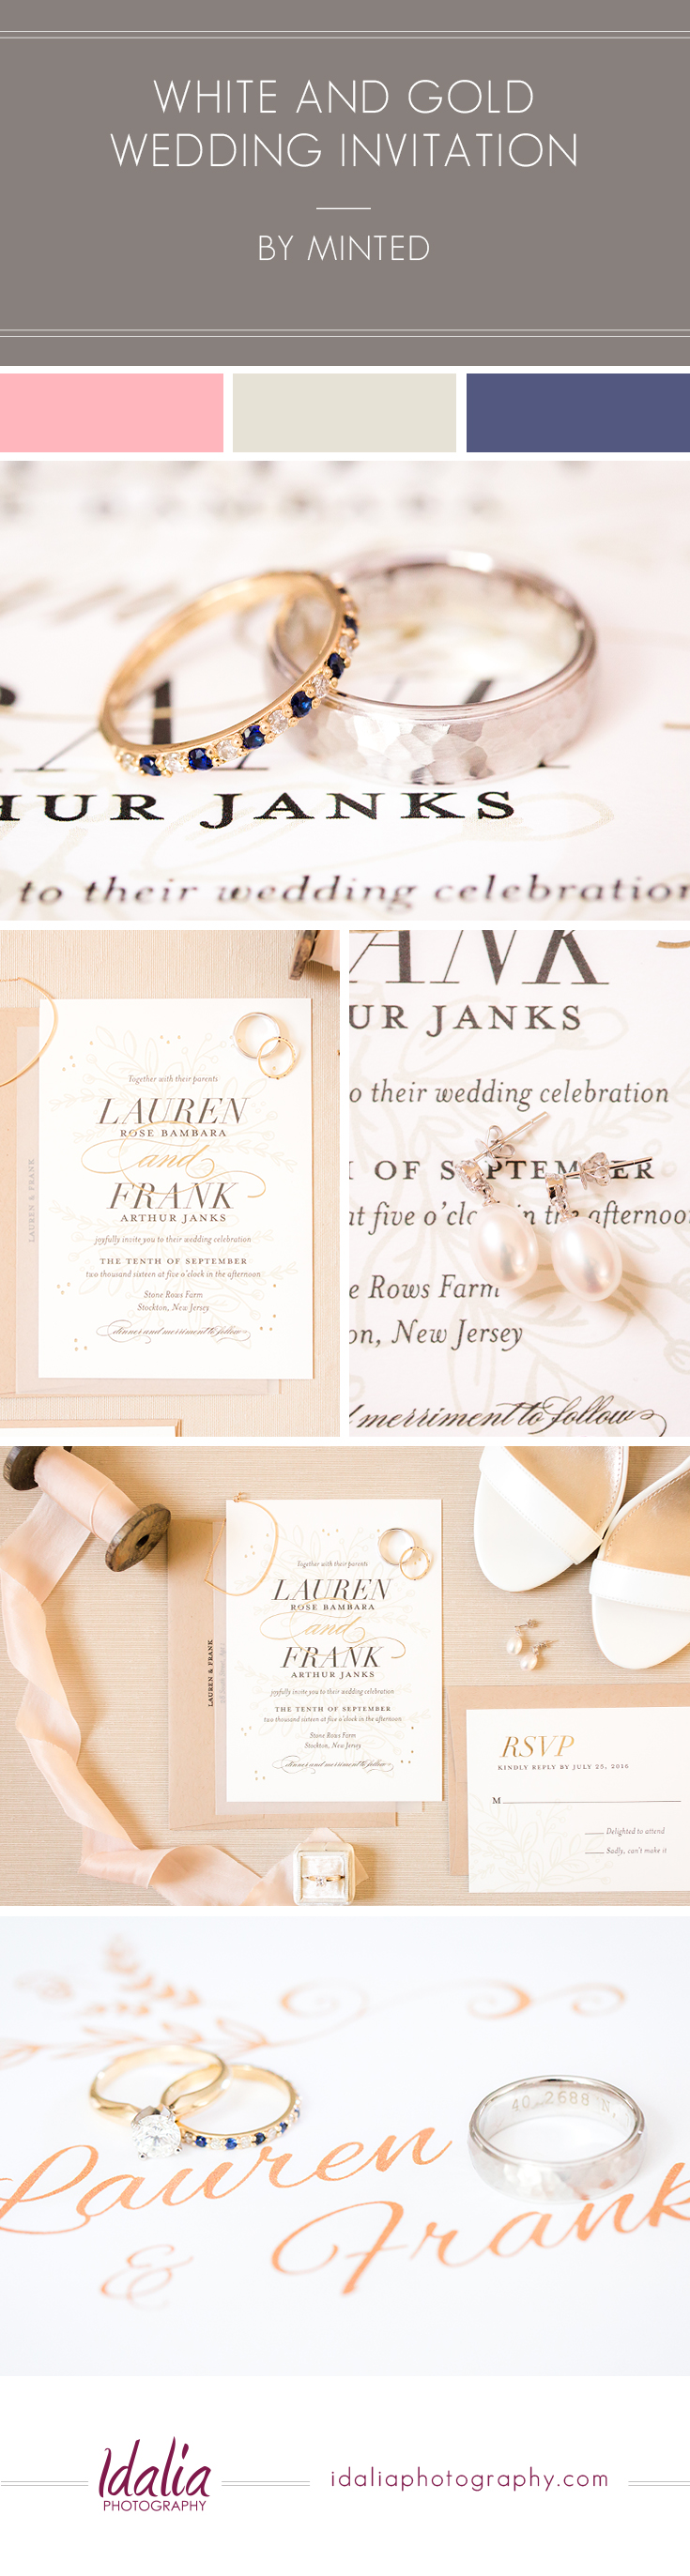 White and Gold Wedding Invitation by Minted